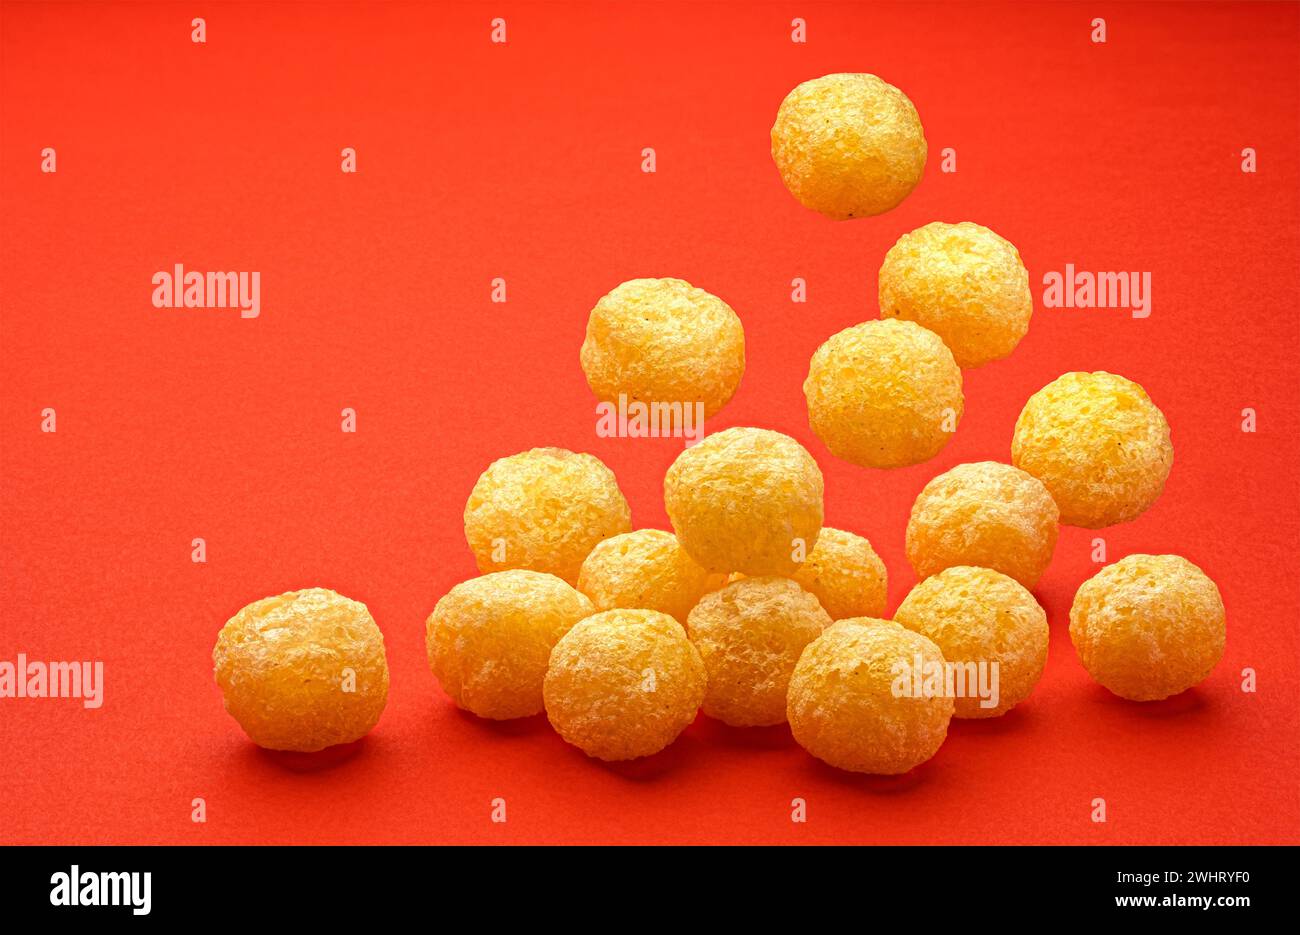 Falling corn balls isolated on red background, full depth of field Stock Photo